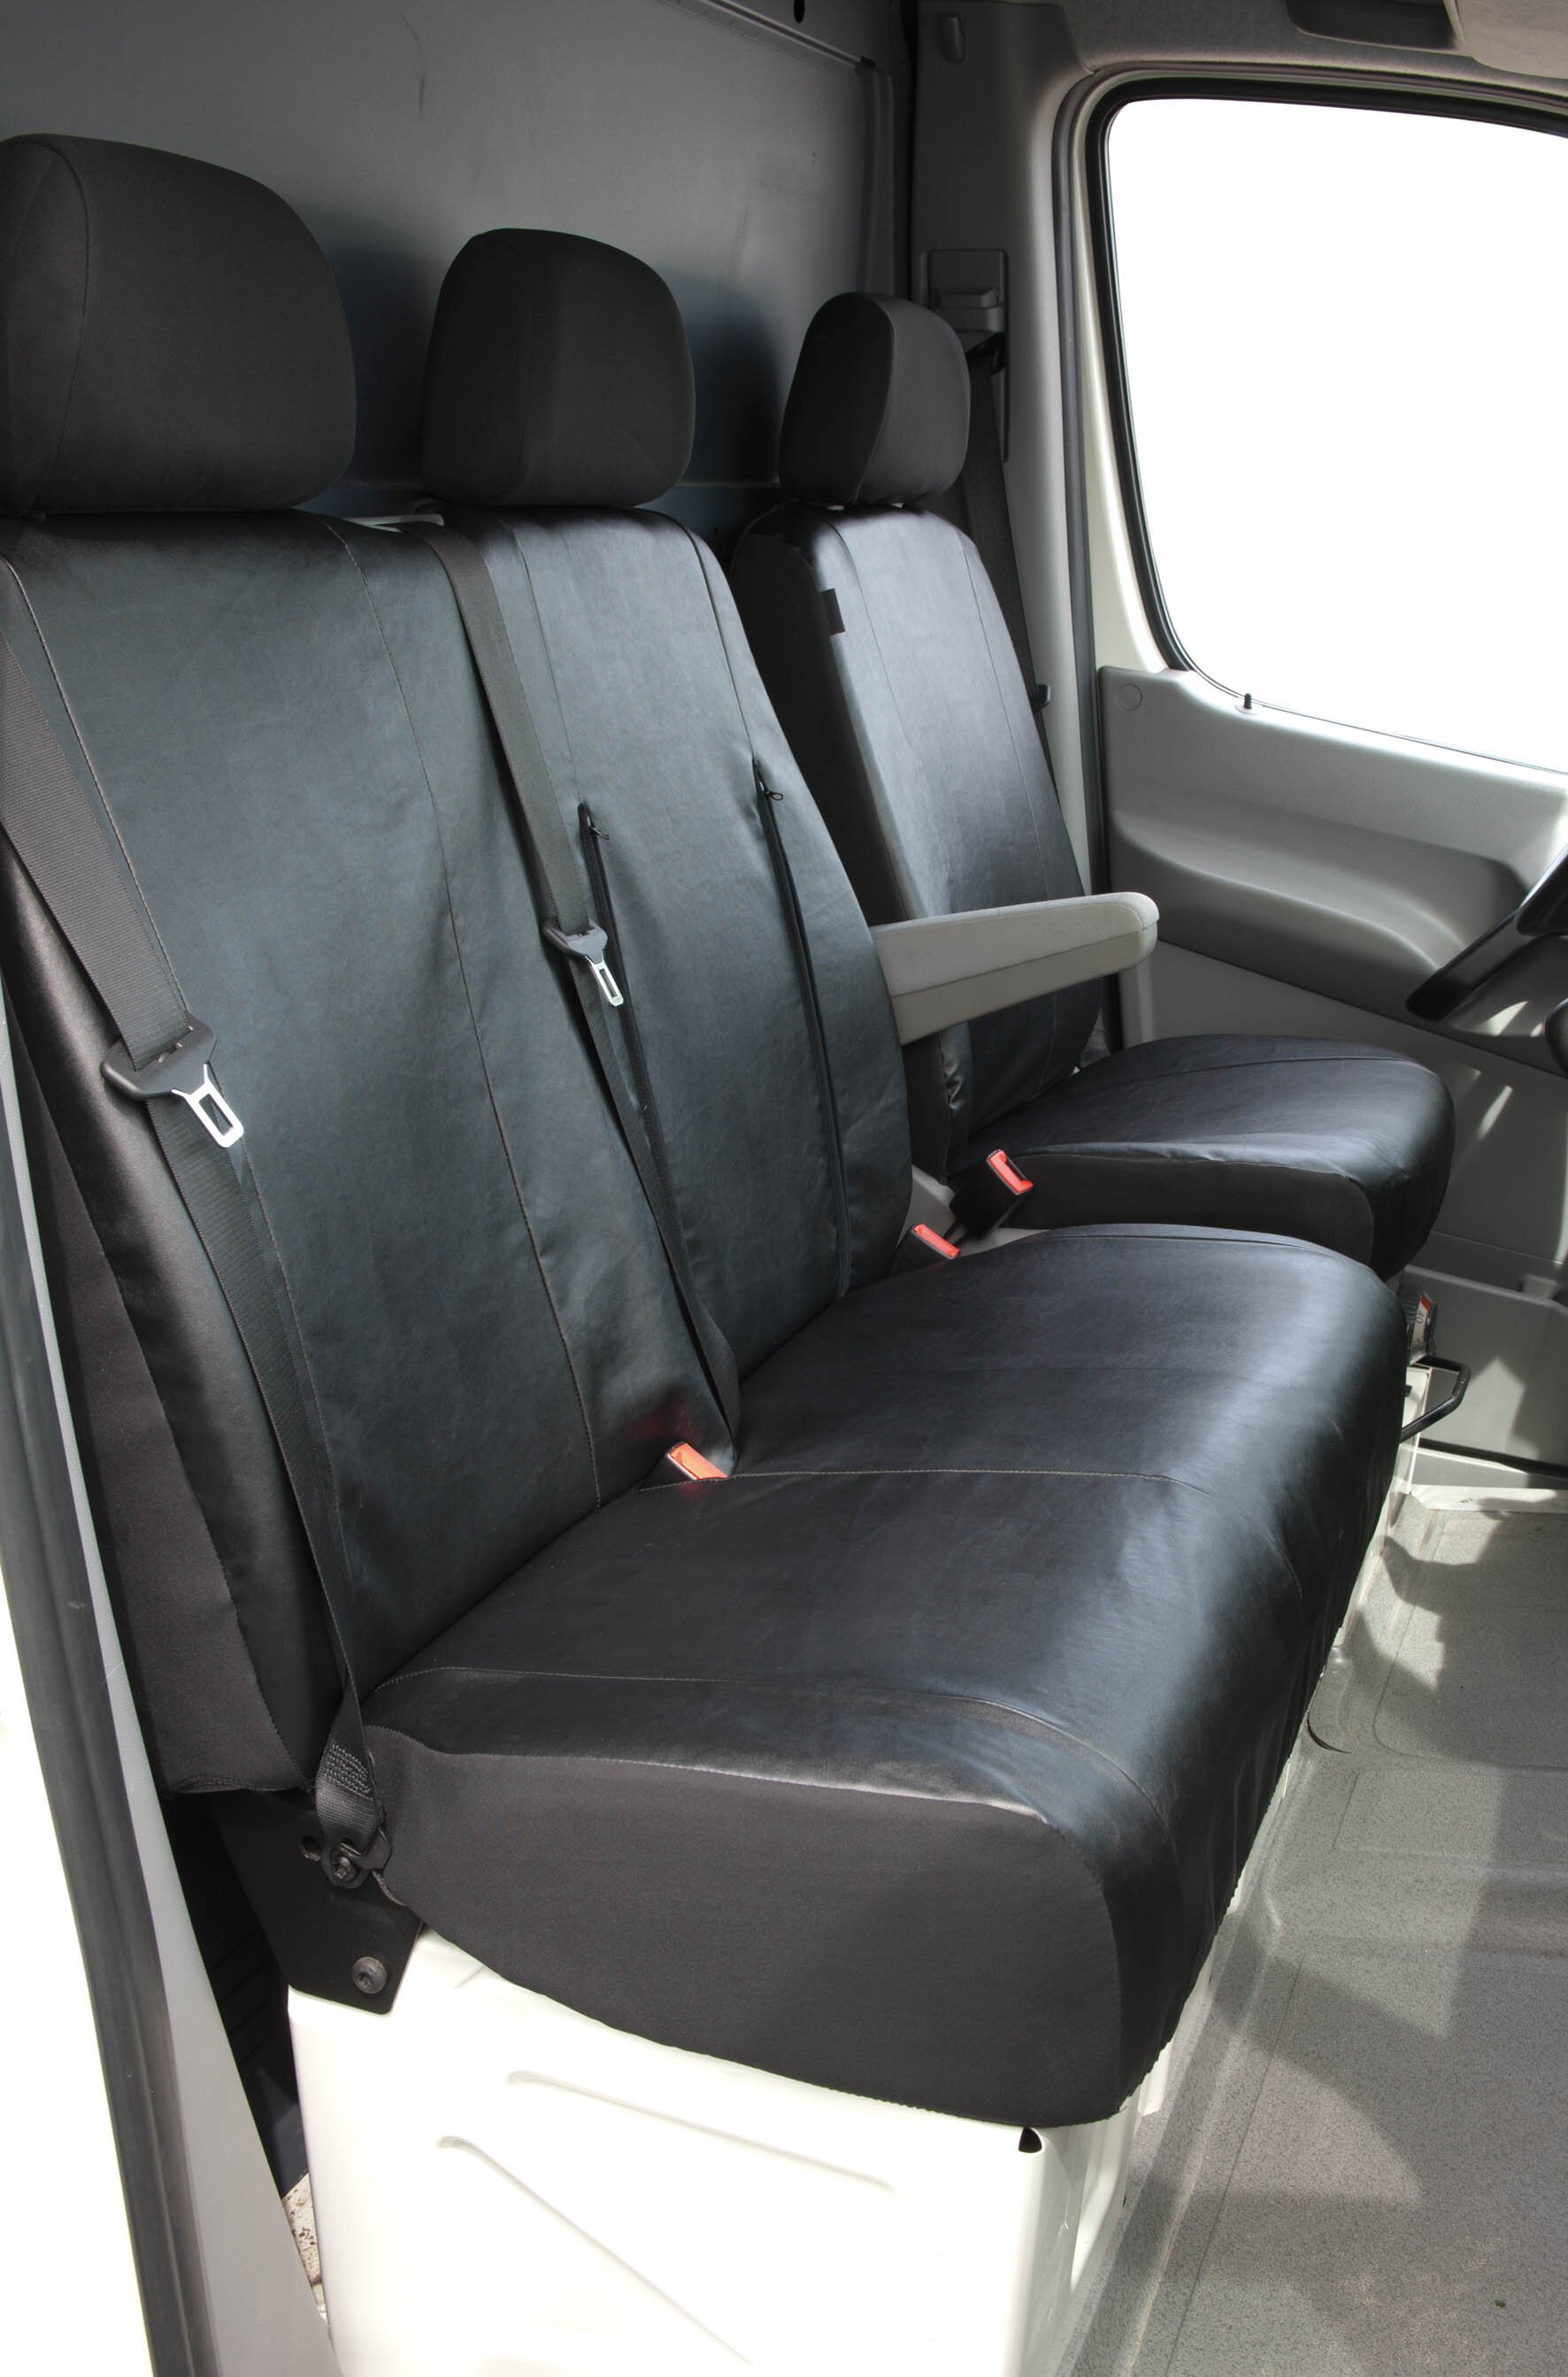 Seat cover made of imitation leather for VW Crafter, Mercedes Sprinter, single seat cover, double seat cover